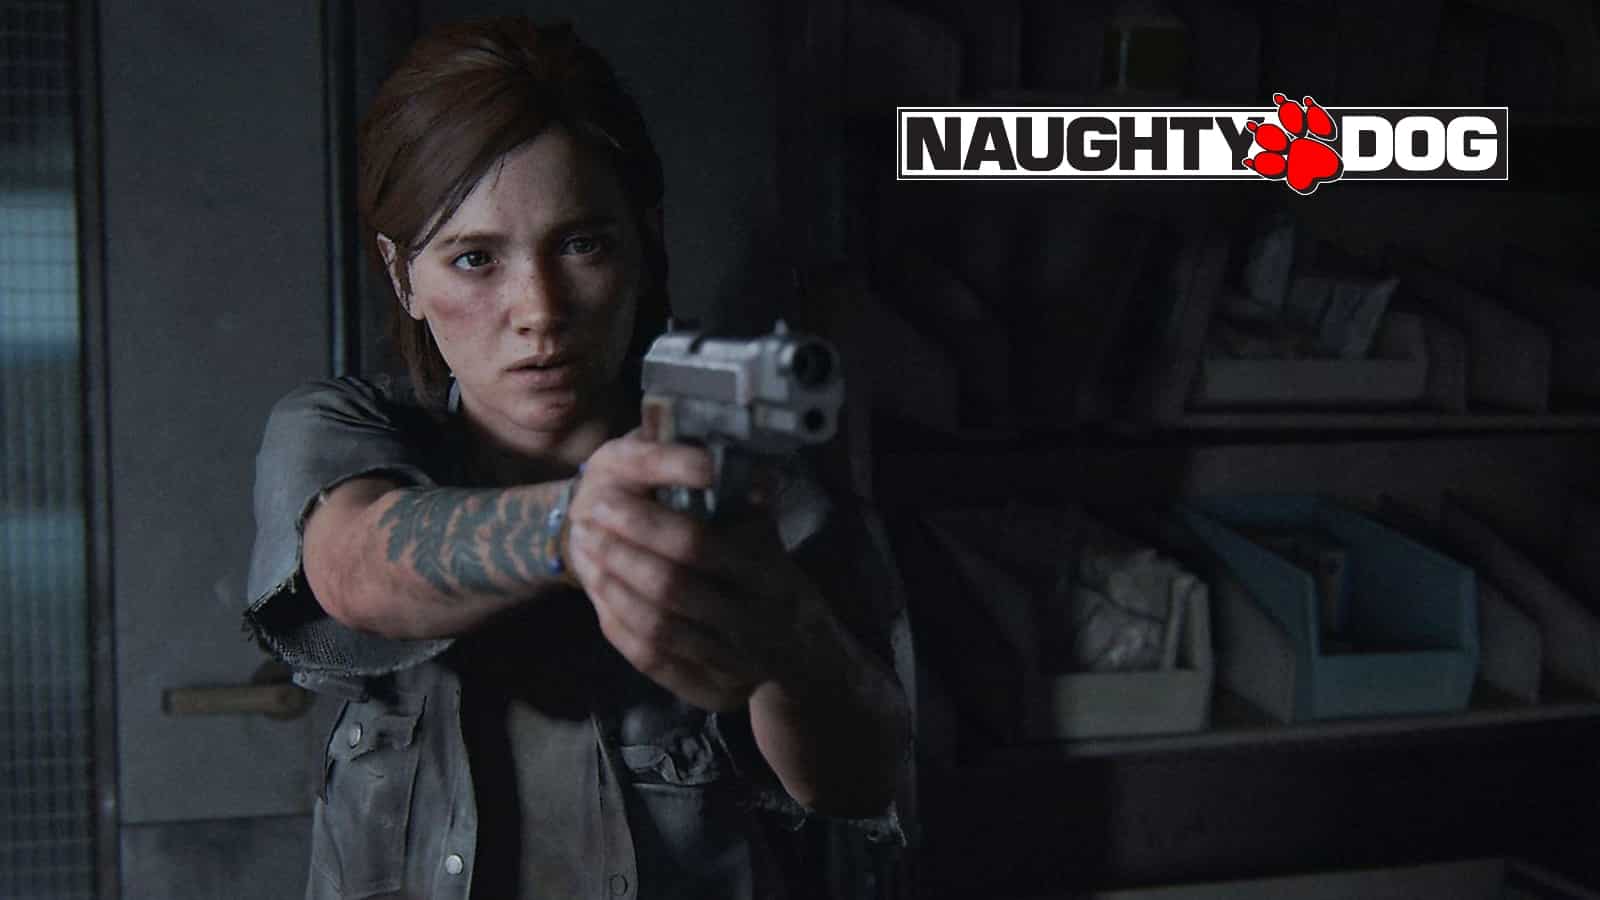 The last of us ellie holding gun with Naughty Dog logo